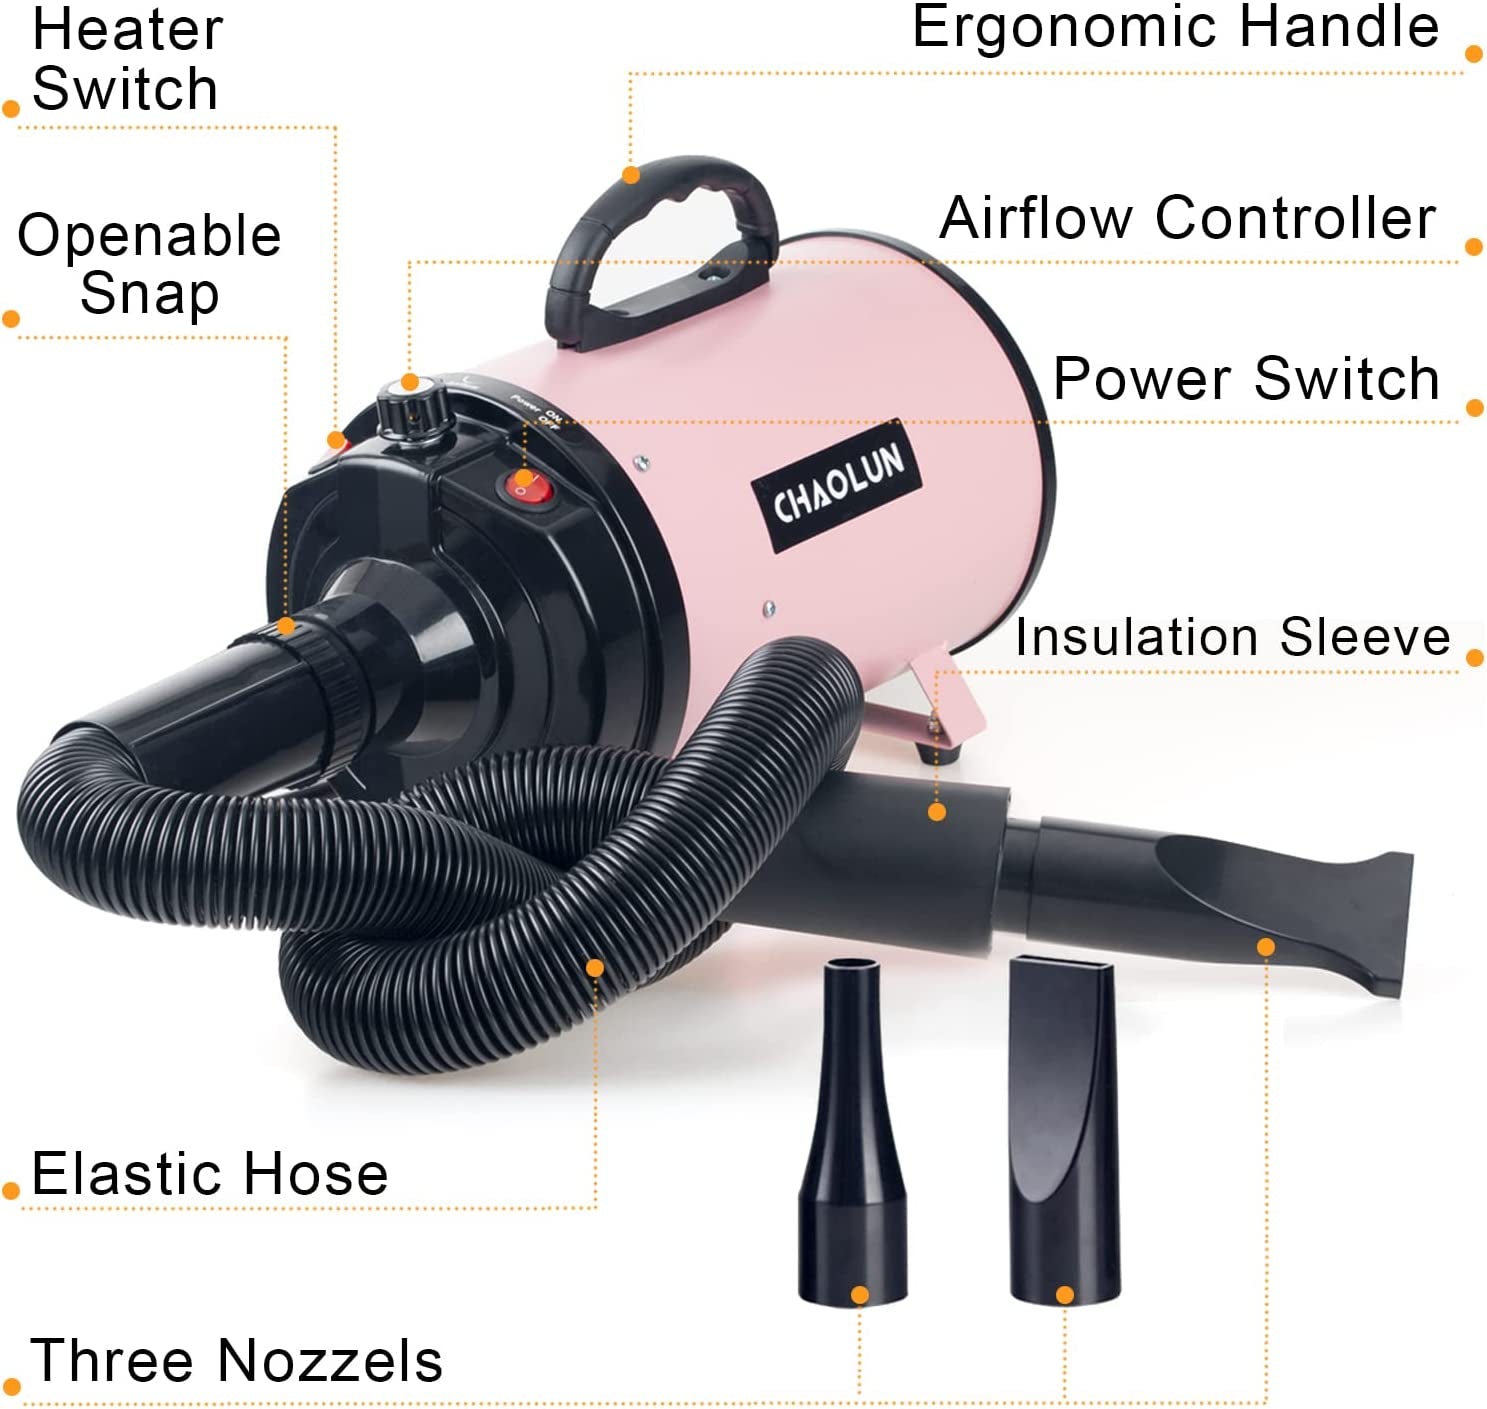 Dog Dryer, Dog Blow Dryer, High Velocity Professional Pet Grooming Dryer, Dog Hair Dryer with Heater, Stepless Adjustable Speed, 3 Different Nozzles and a Comb, Pink